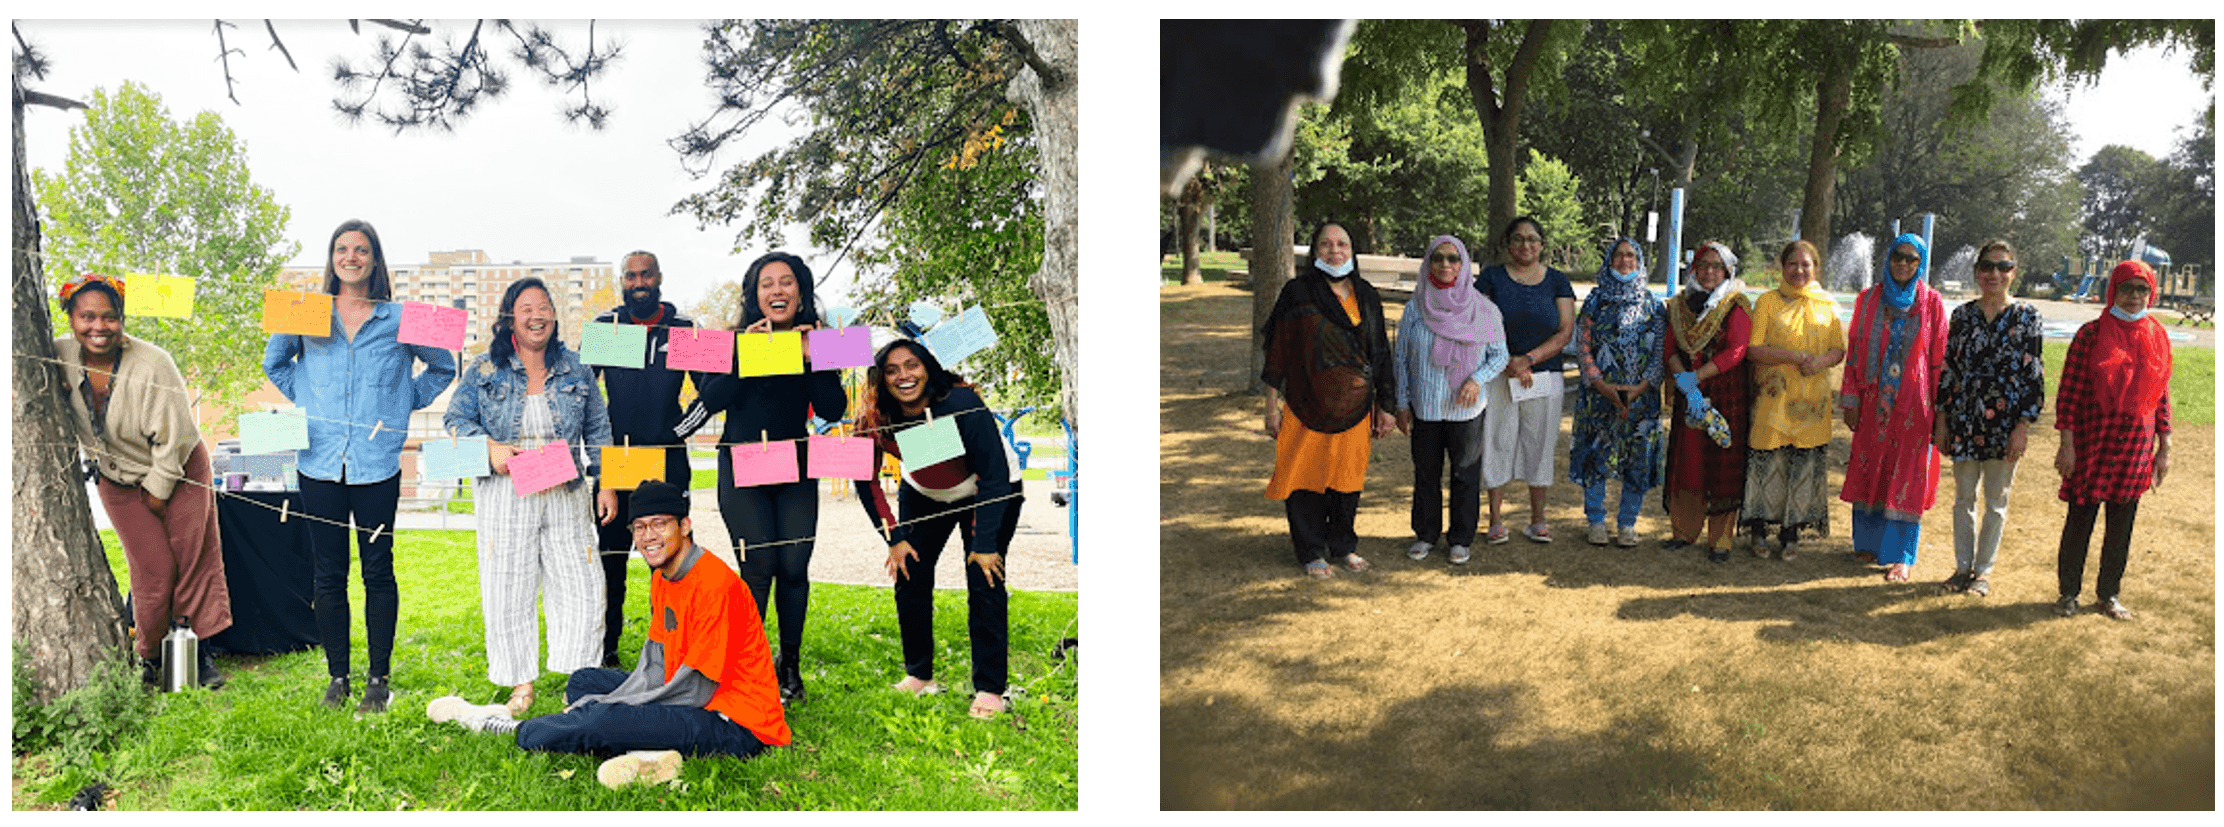 On the left: The DIA Staff and Board participating in a Parks Future’s Design Lab. Credit: DIA / On the right: Social researcher Ari interviewing members of Shwasti at Dentonia Park in August 2021. 